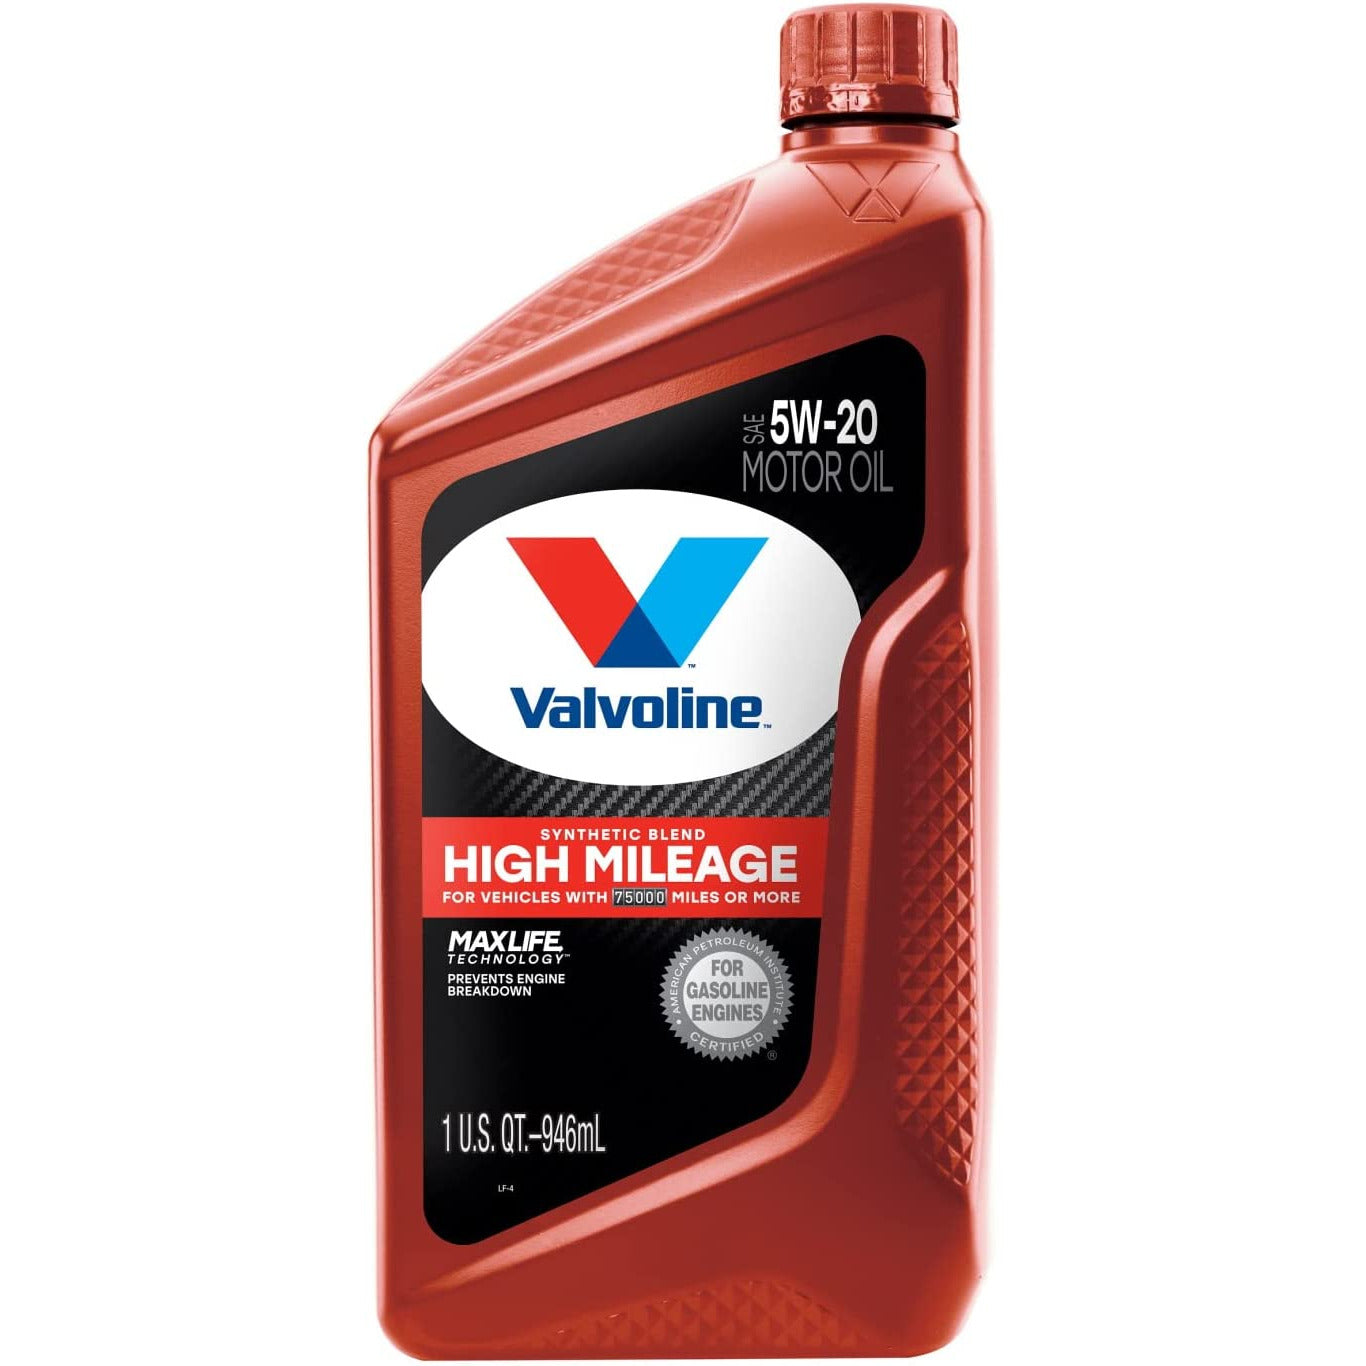 VAL VV169 | High Mileage MaxLife Technology Synthetic Blend 5W-20 Motor Oil  : 1 QT